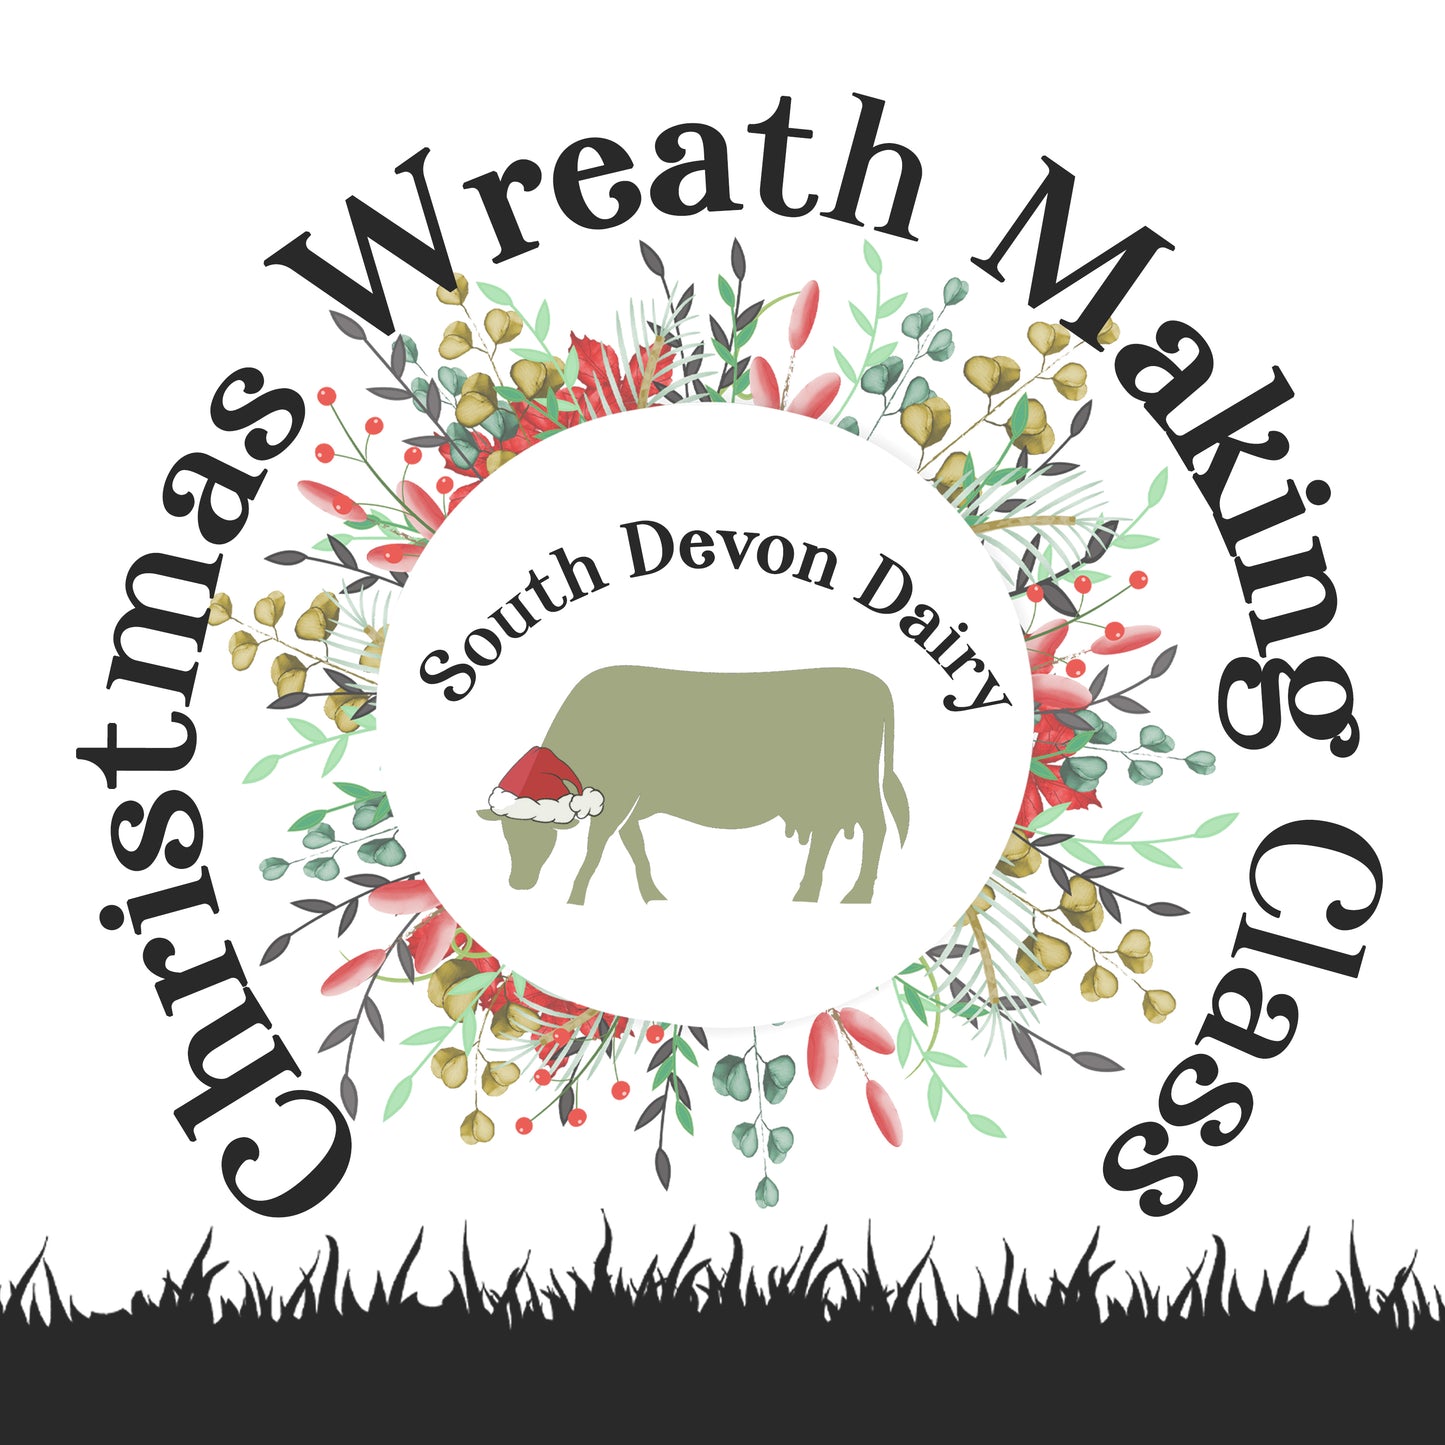 Christmas Wreath Making Class – Saturday 9th December 7pm-9pm.